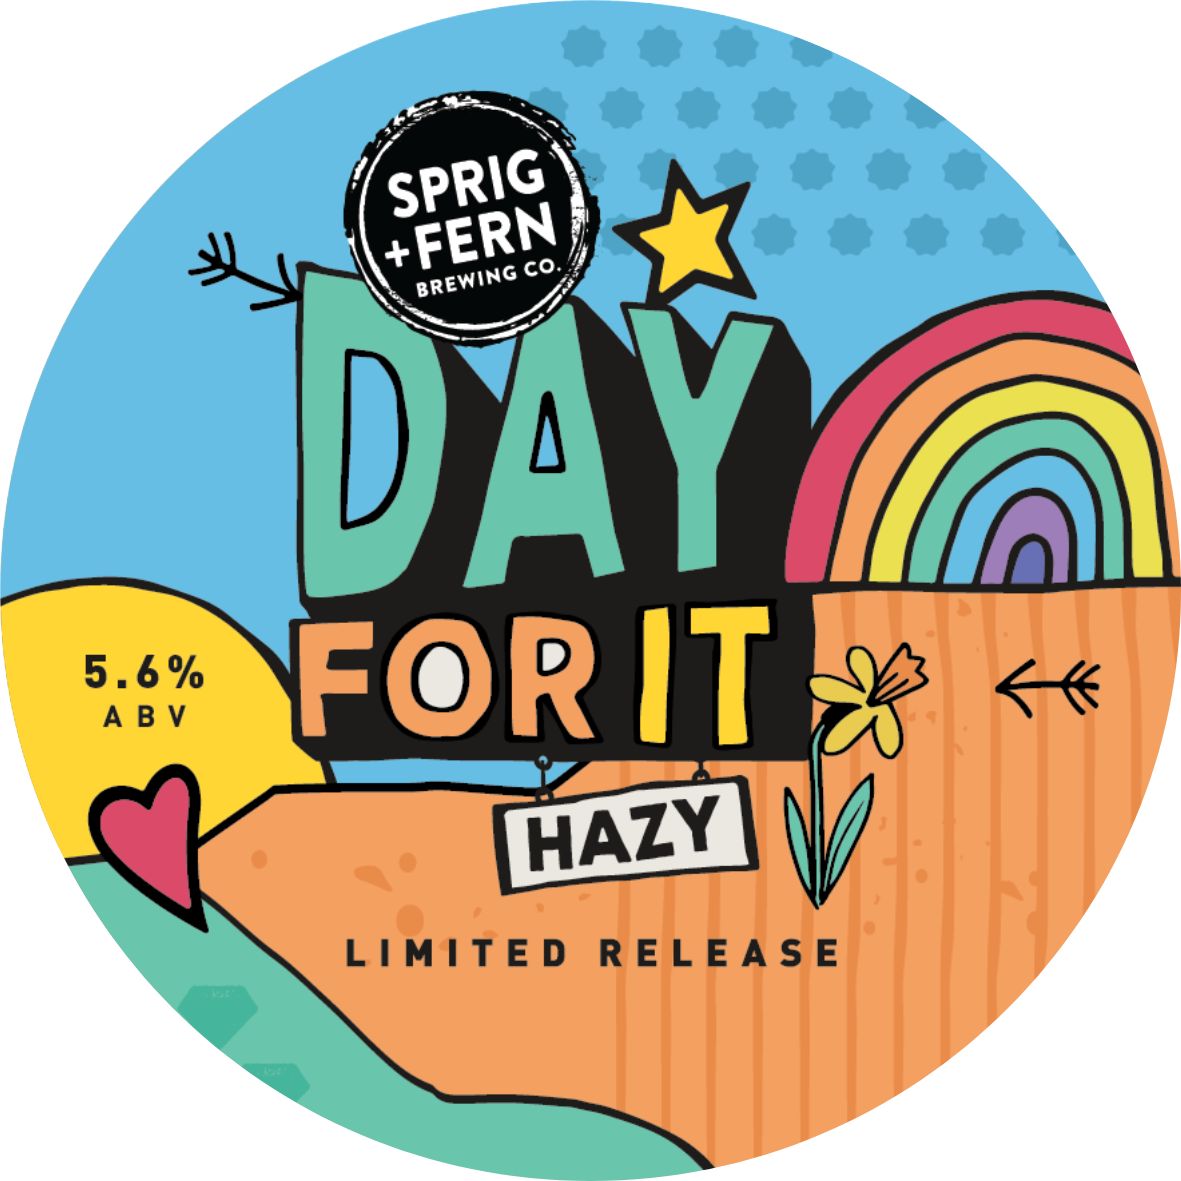 Sprig and Fern's Day For It Hazy limited release beer tap badge